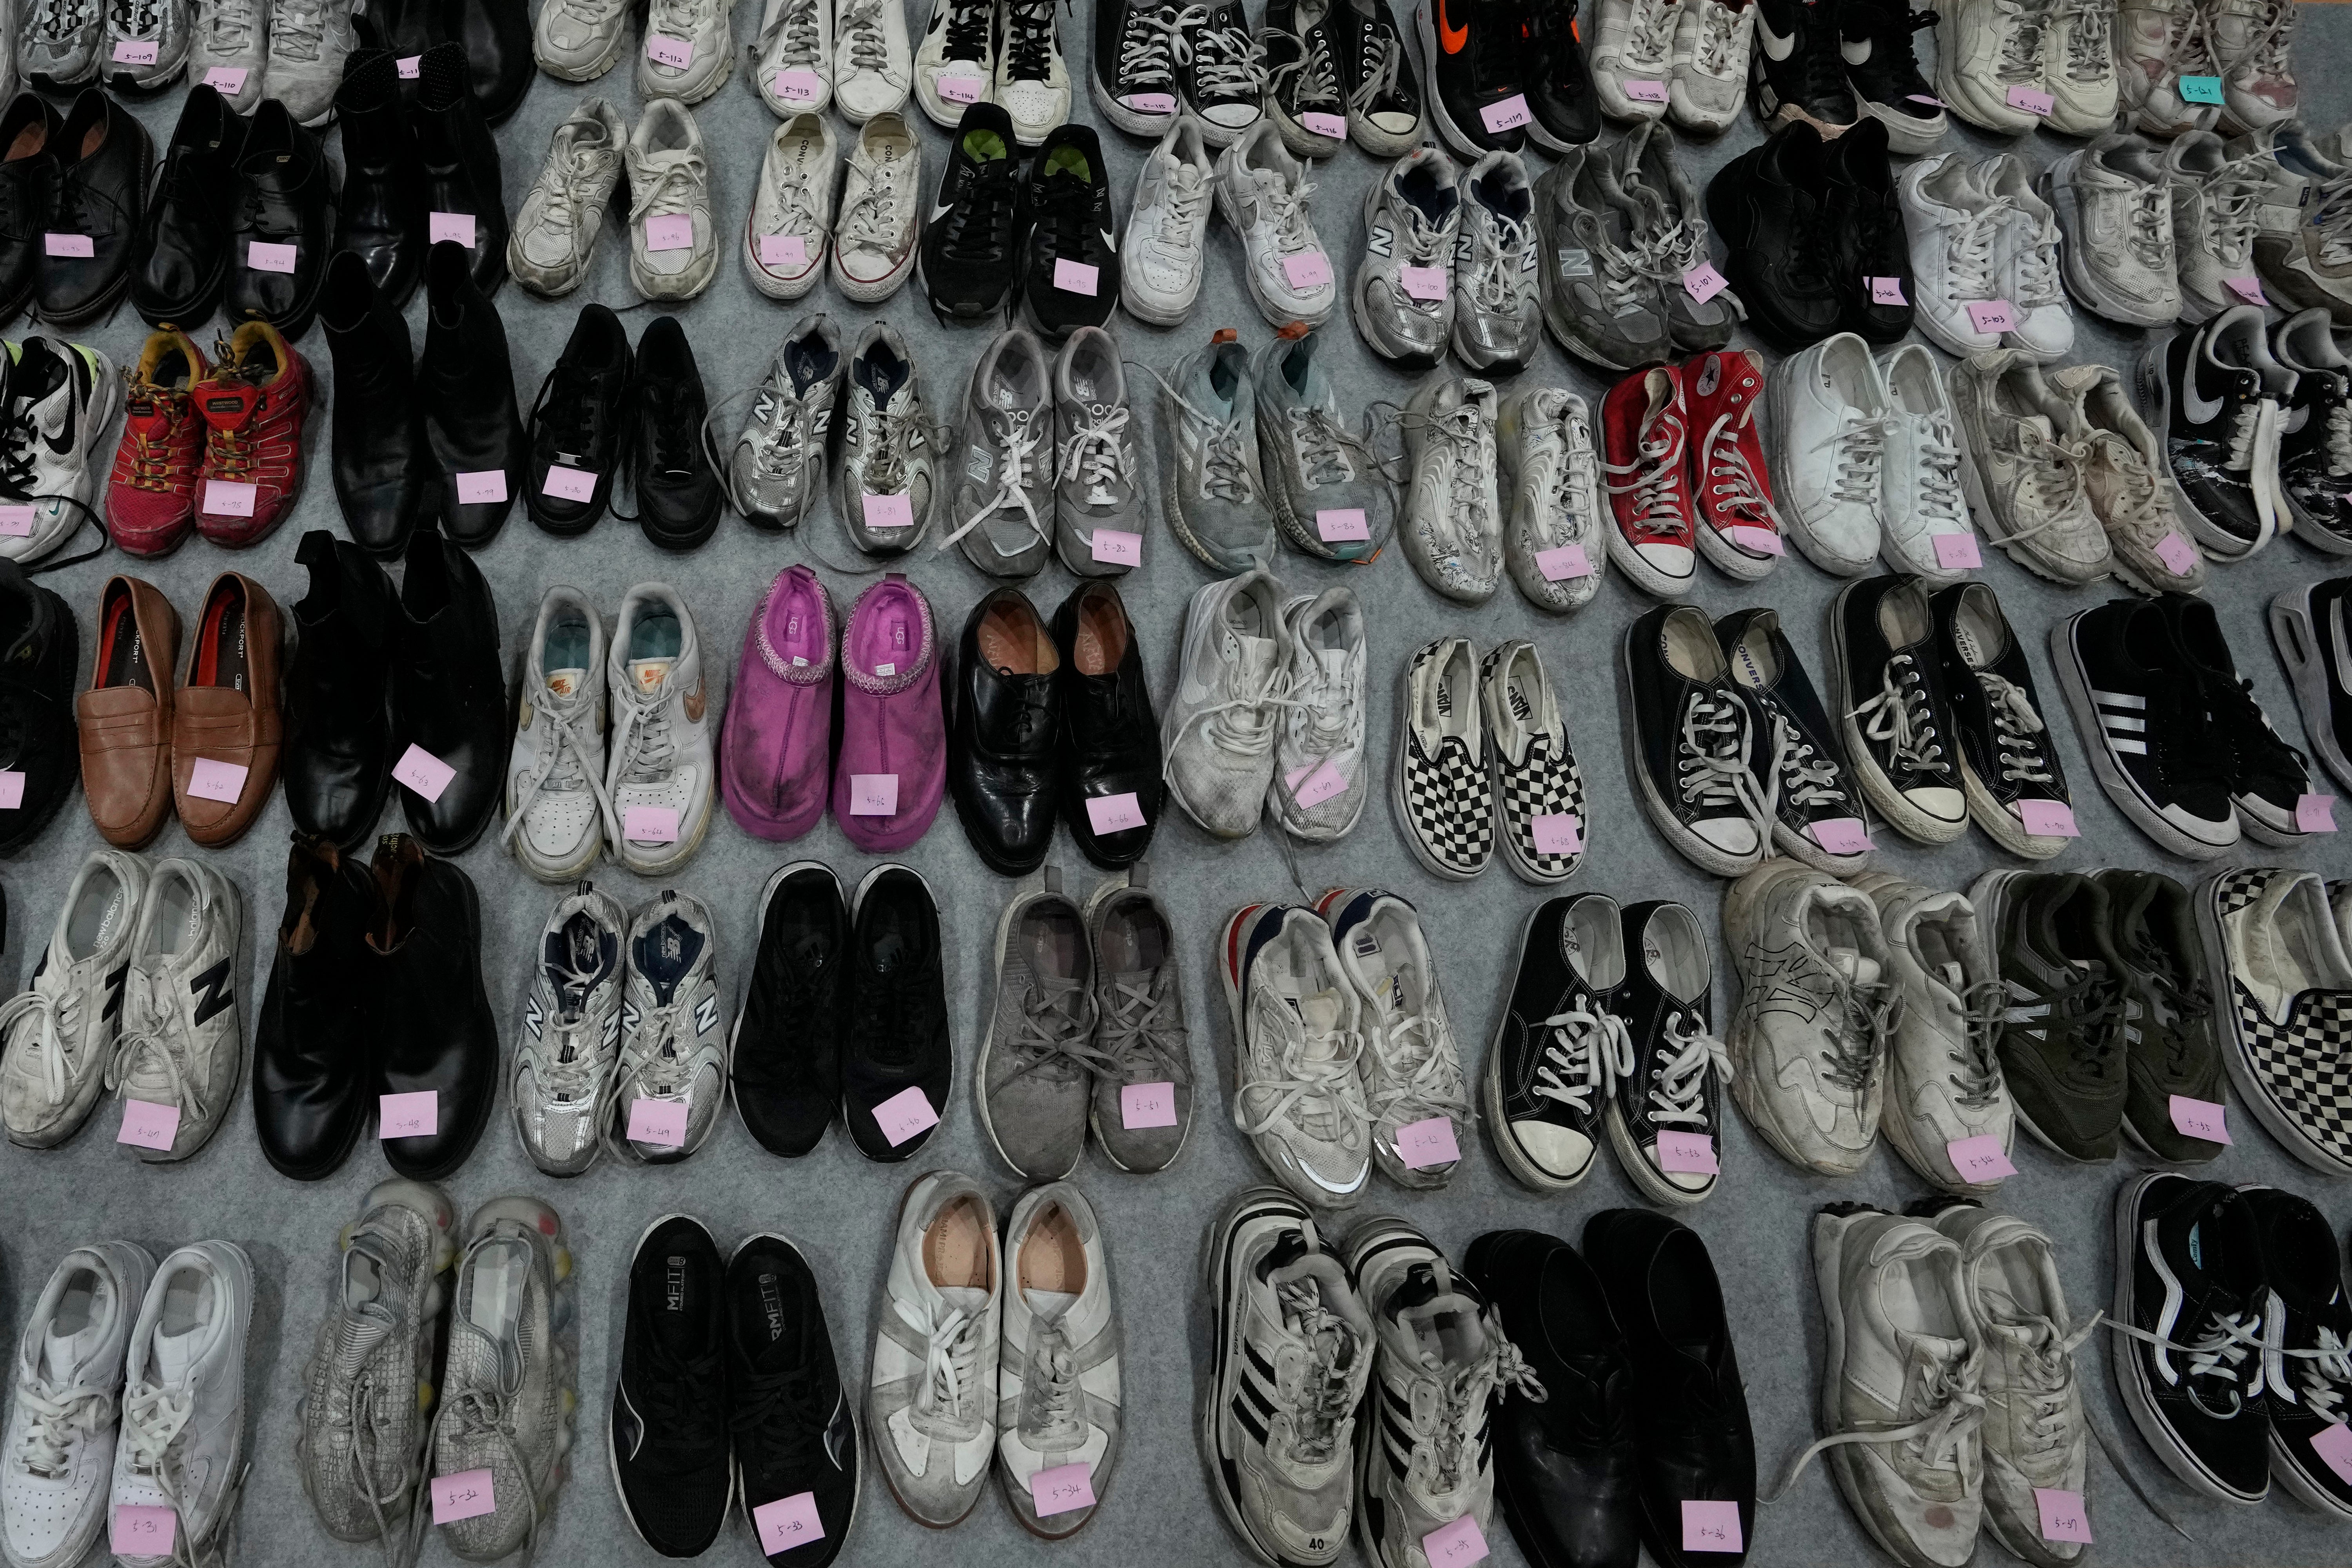 Shoes are seen among a huge collection items found in Itaewon following the crowd surge